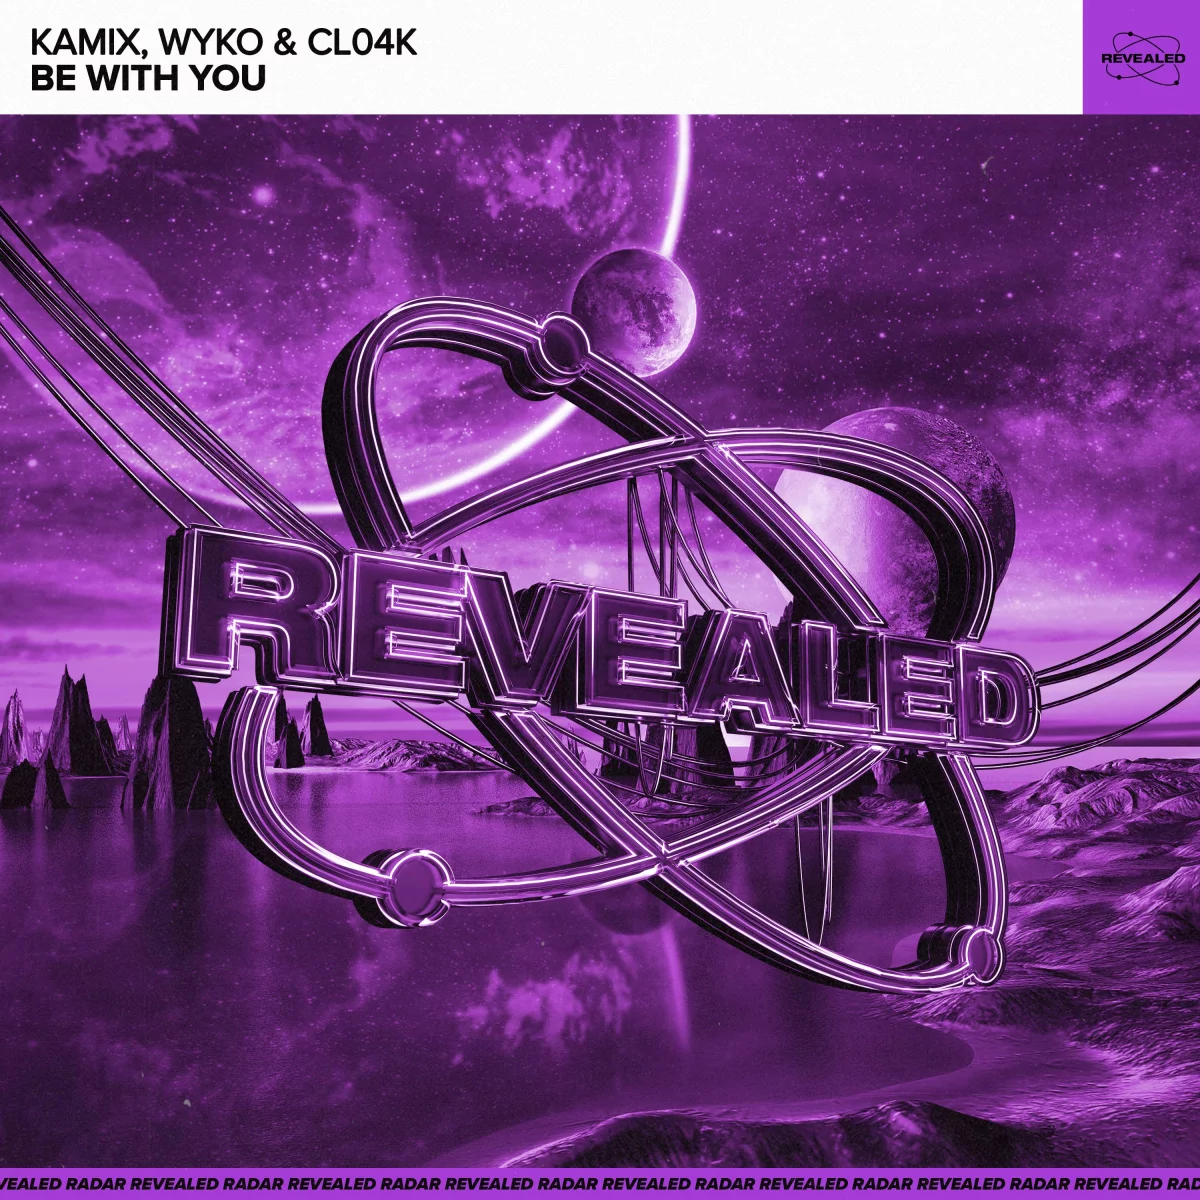 Be With You - Kamix⁠, WYKO⁠ & Cl04k⁠